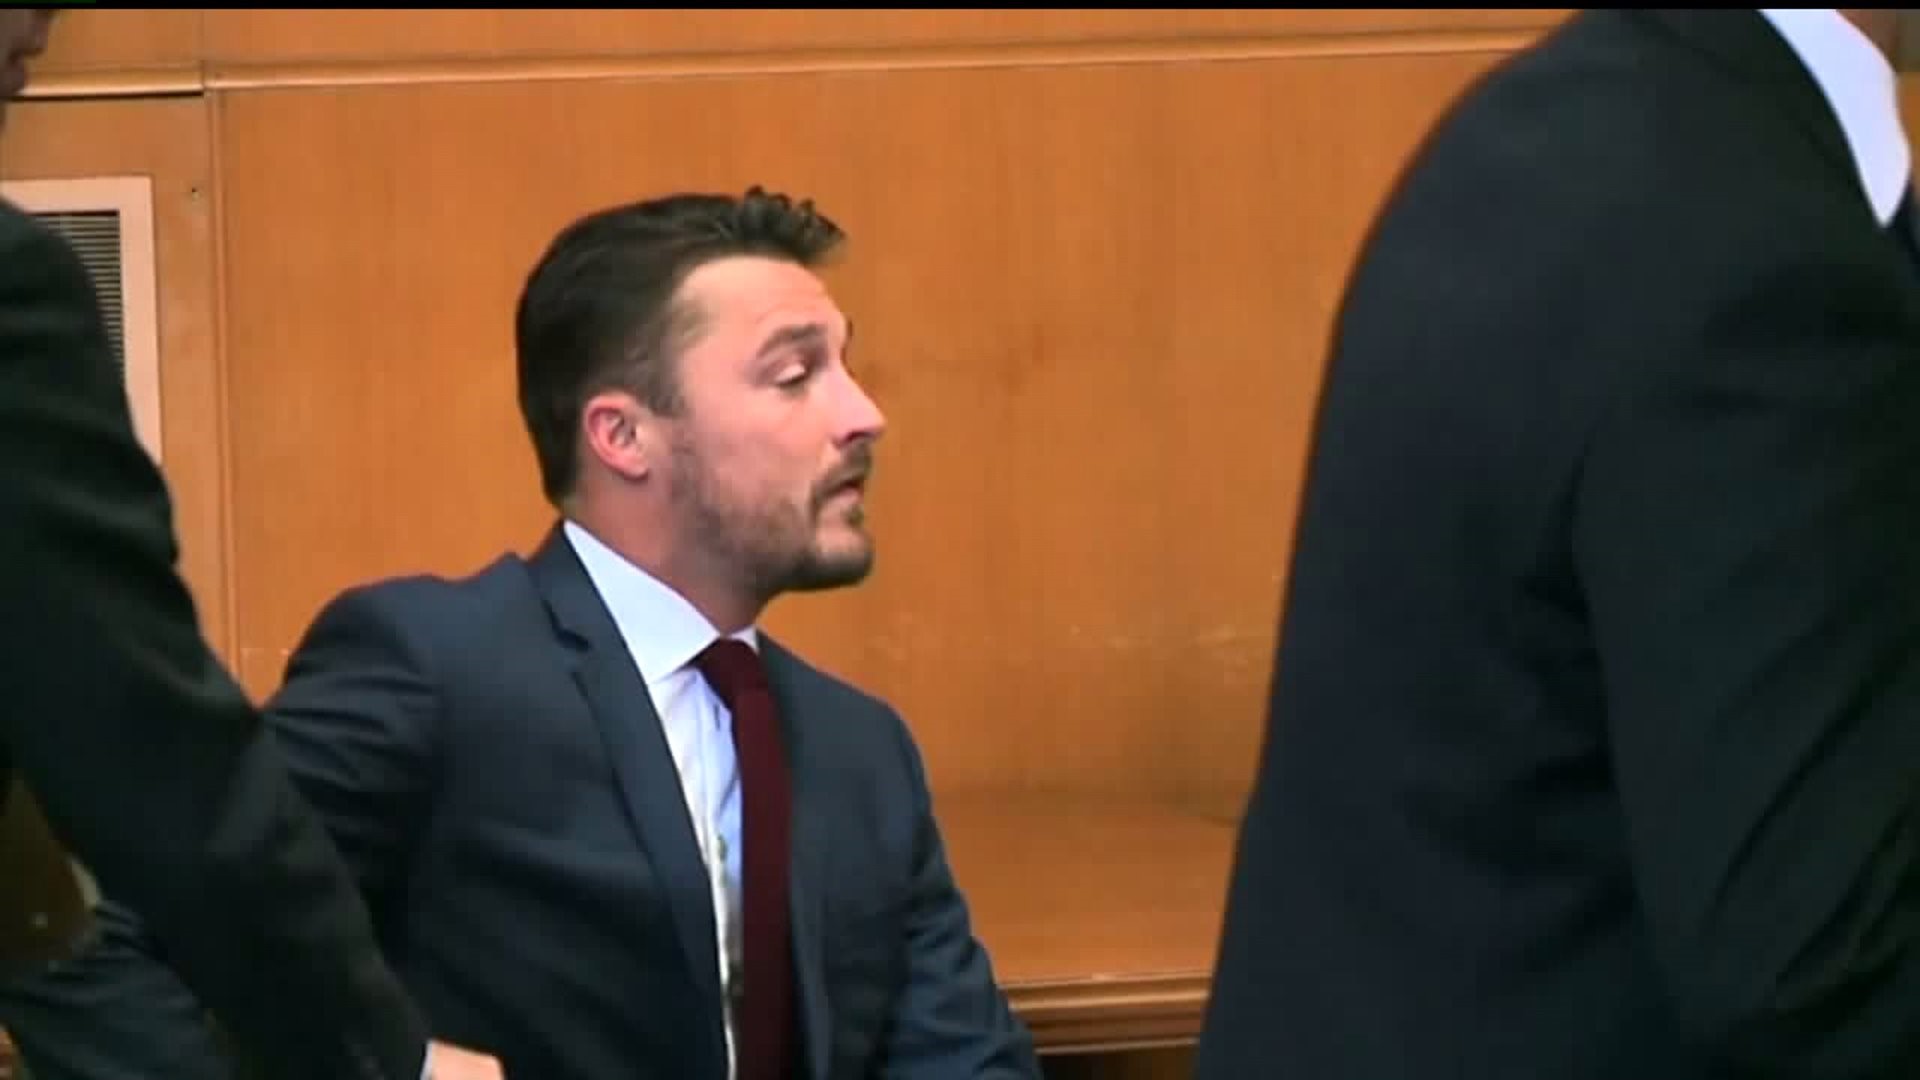 Chris Soules sentenced 2 years after deadly hit-and-run crash